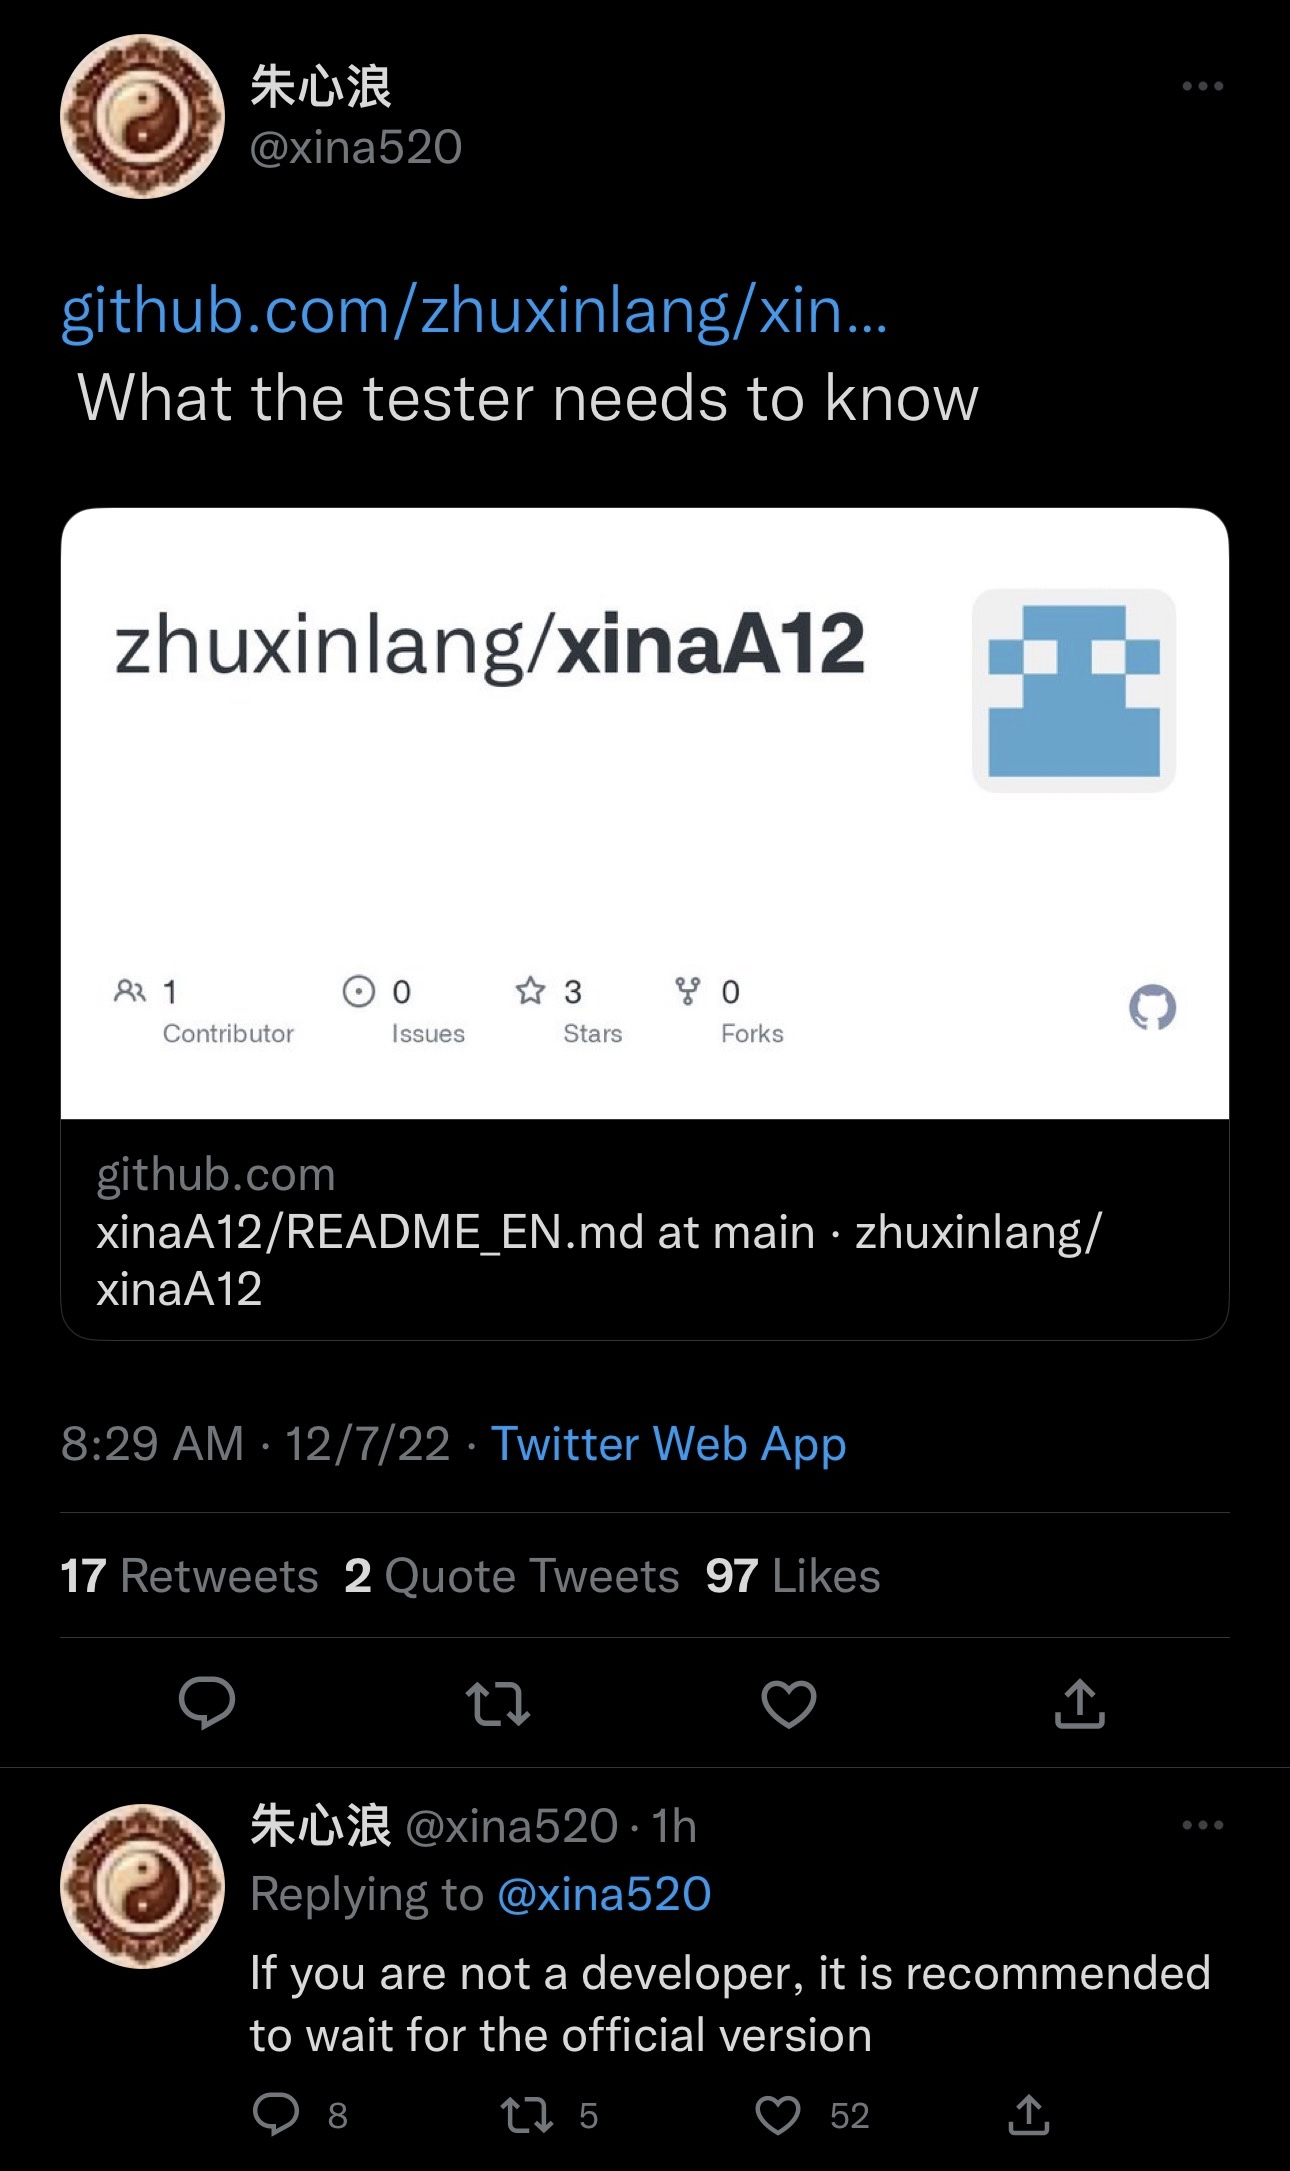 Xina520 warns that XinaA15 jailbreak is intended for developers for now.